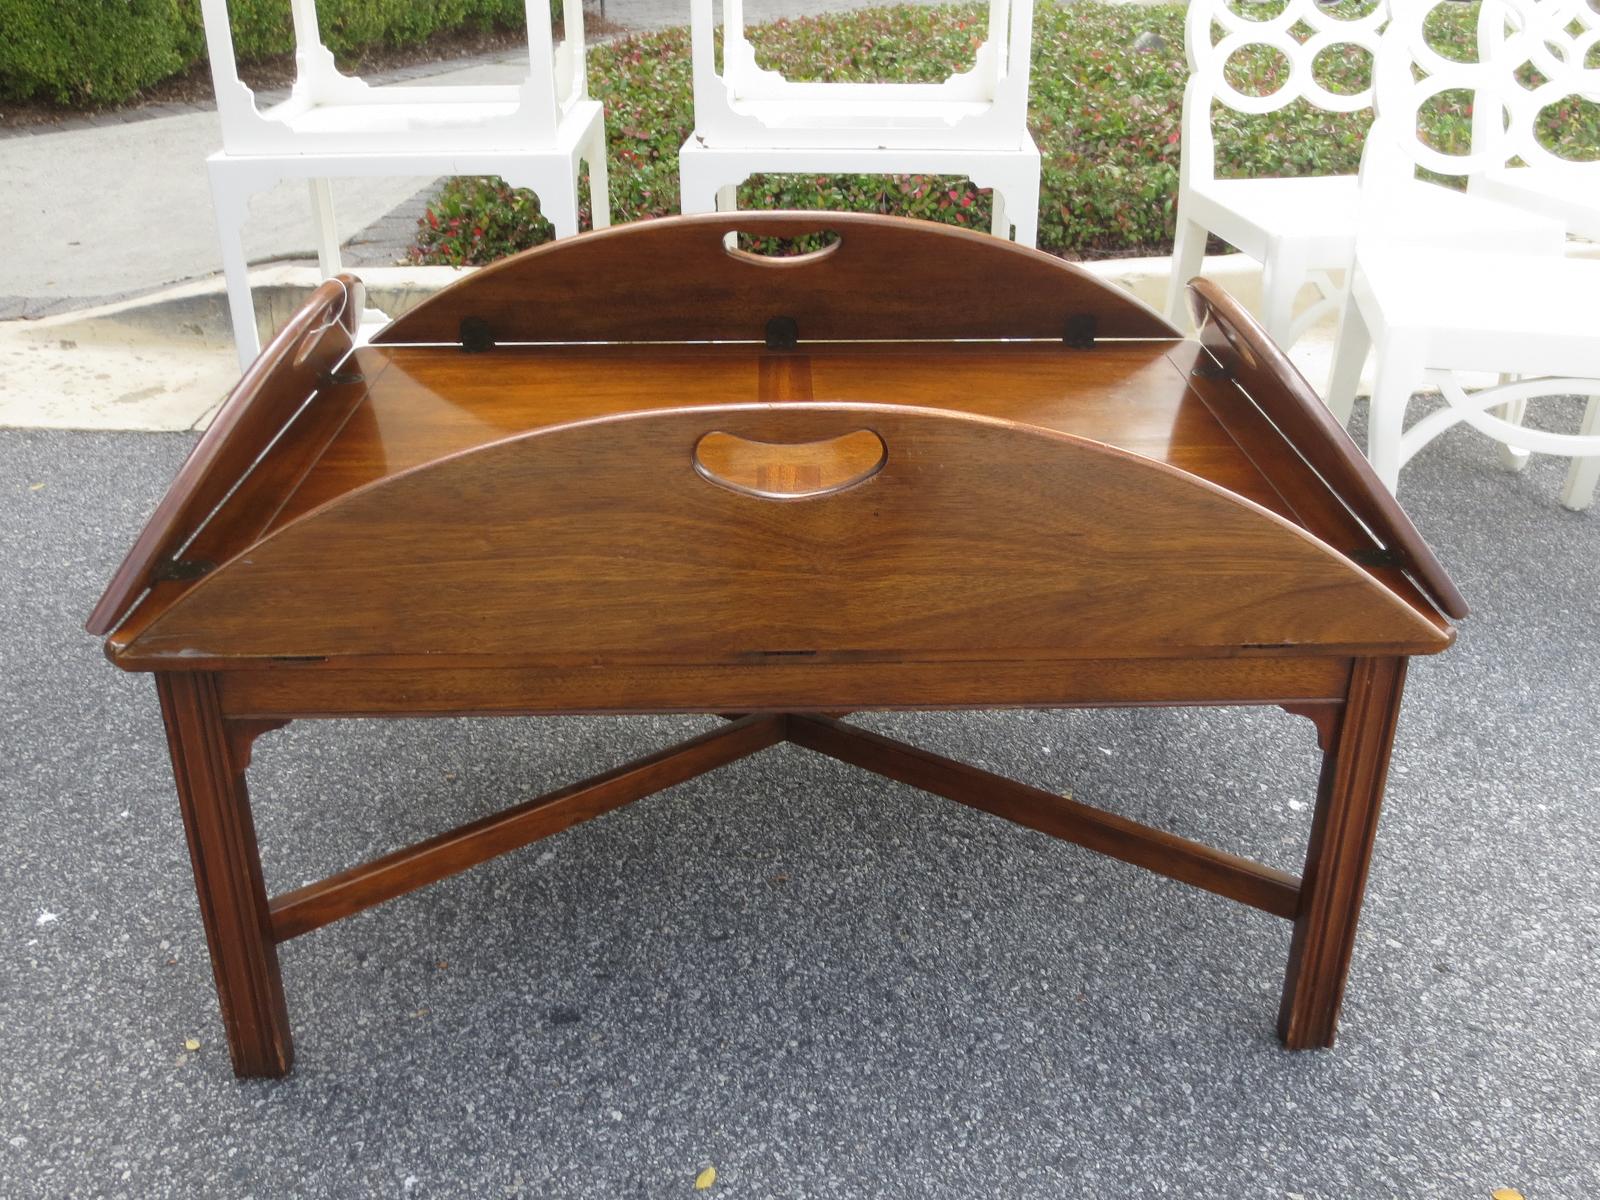 20th century mahogany oversized butler's tray coffee table by Baker
Dimensions with flaps up: 40.25